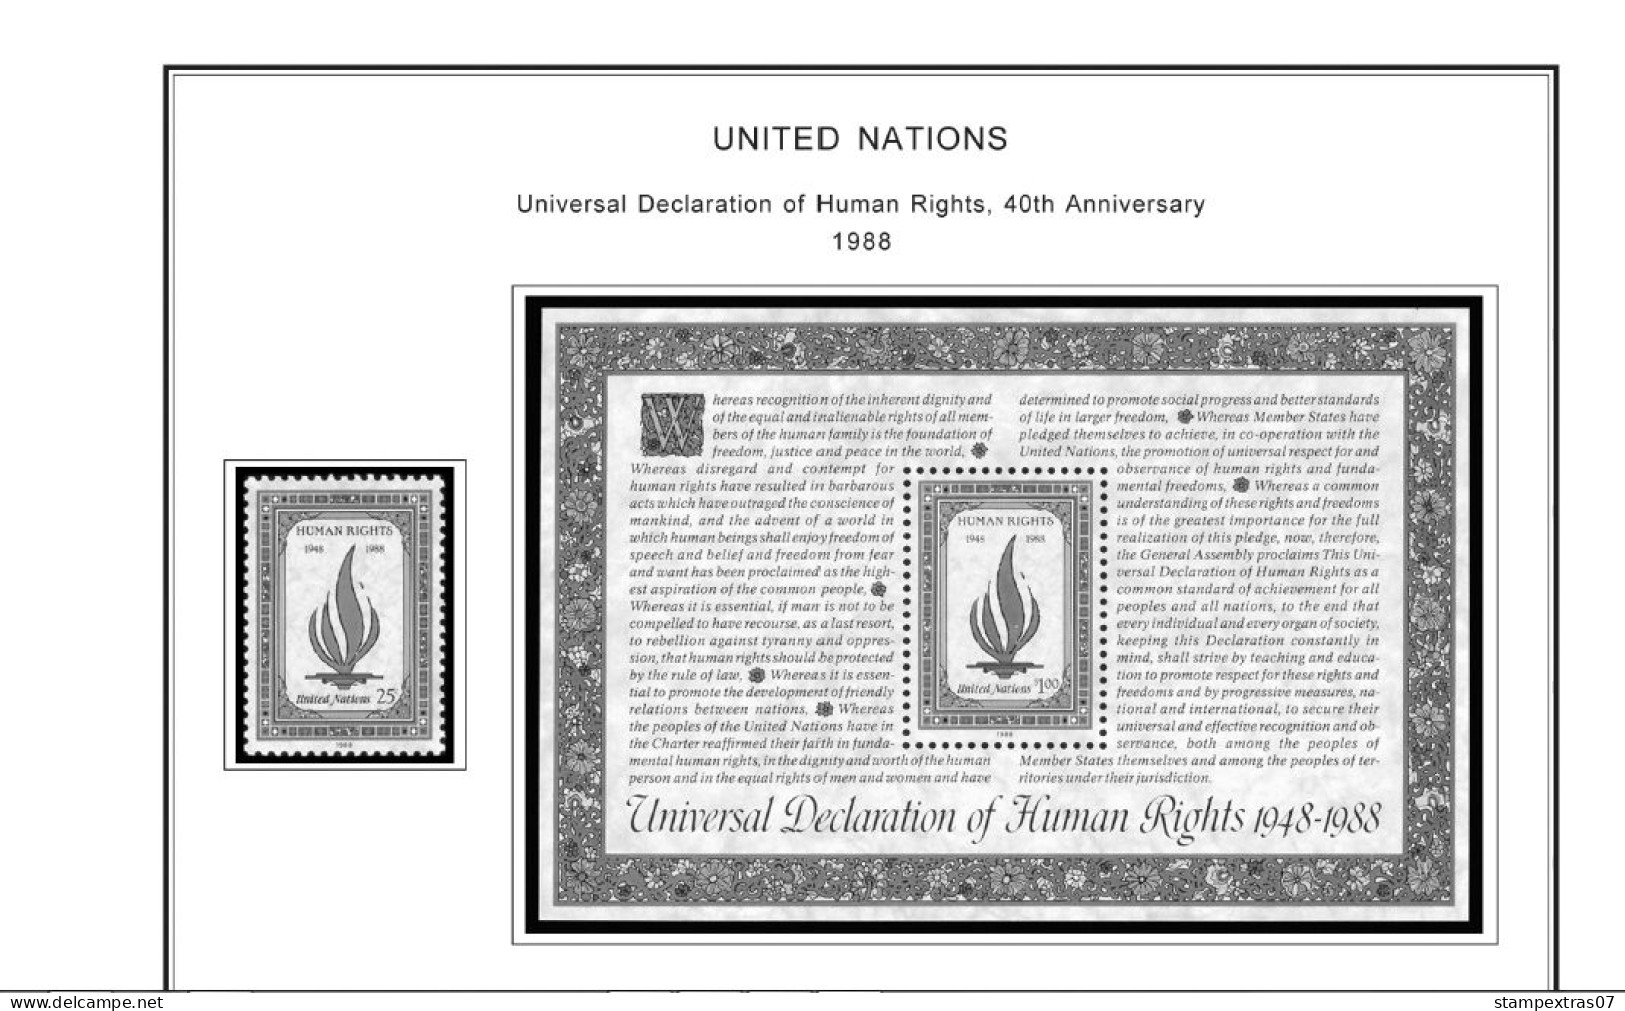 UNITED NATIONS - NEW YORK 1951-2020 STAMP ALBUM PAGES (229 b&w illustrated pages)